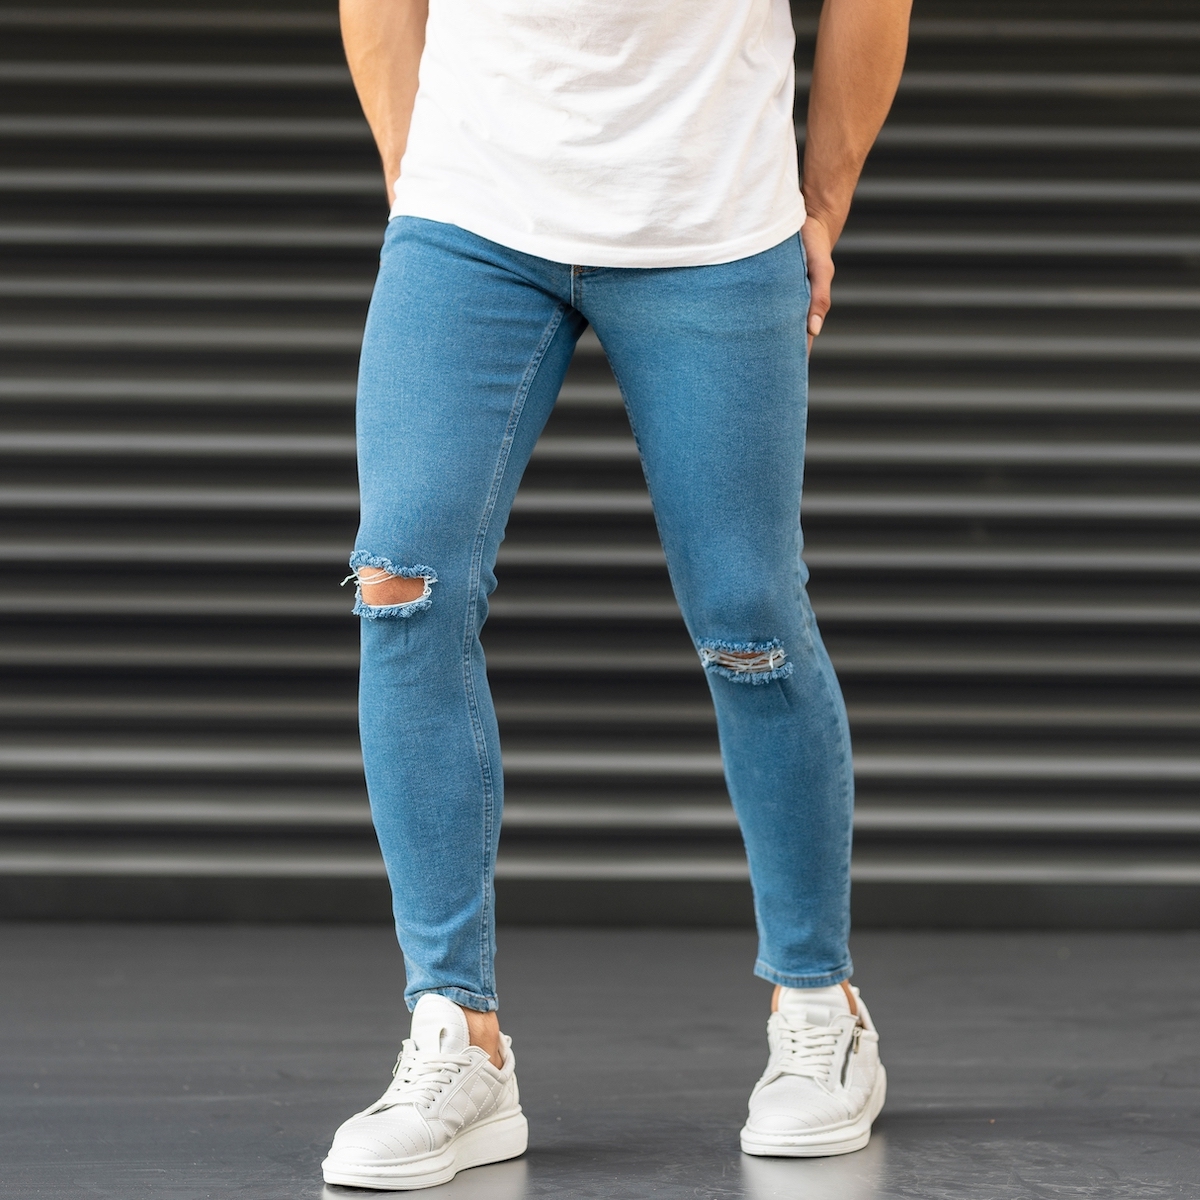 a brand ripped jeans